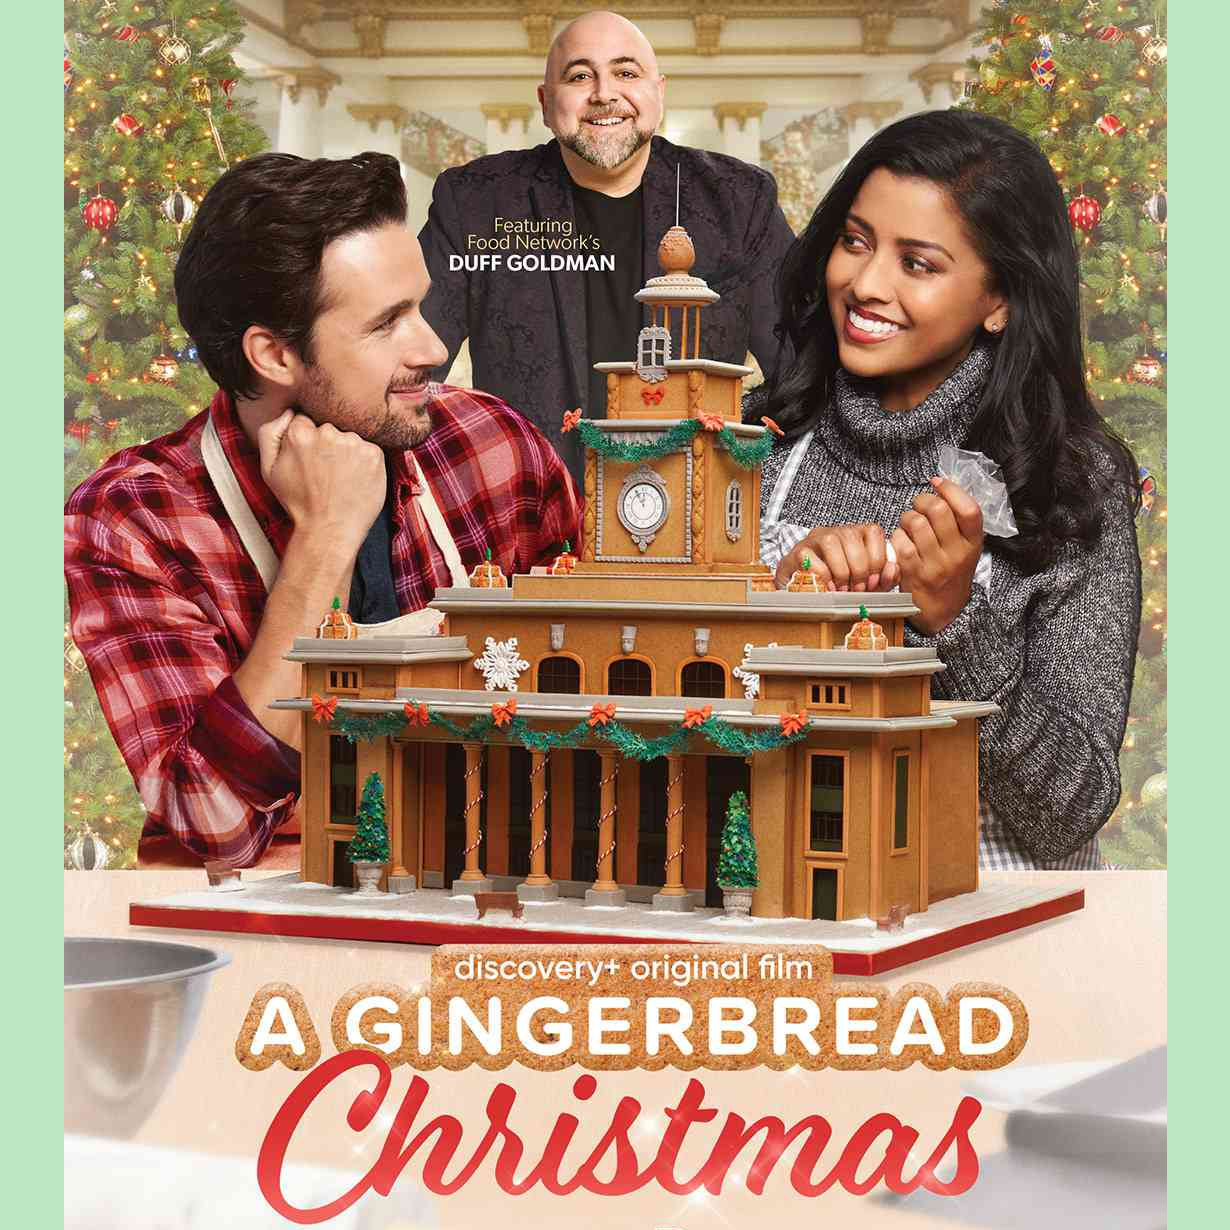 A Christmas movie poster. James is wearing a red flannel top and is staring lovingly at Hazel with his head resting on his chin. Hazel is wearing a grey sweater and a apron, holding a piping bag, smiling at James. They are sitting behind a beautiful gingerbread city hall. Duff Goldman is behind them. The title 'A Gingerbread Christmas' is at the bottom of the poster.